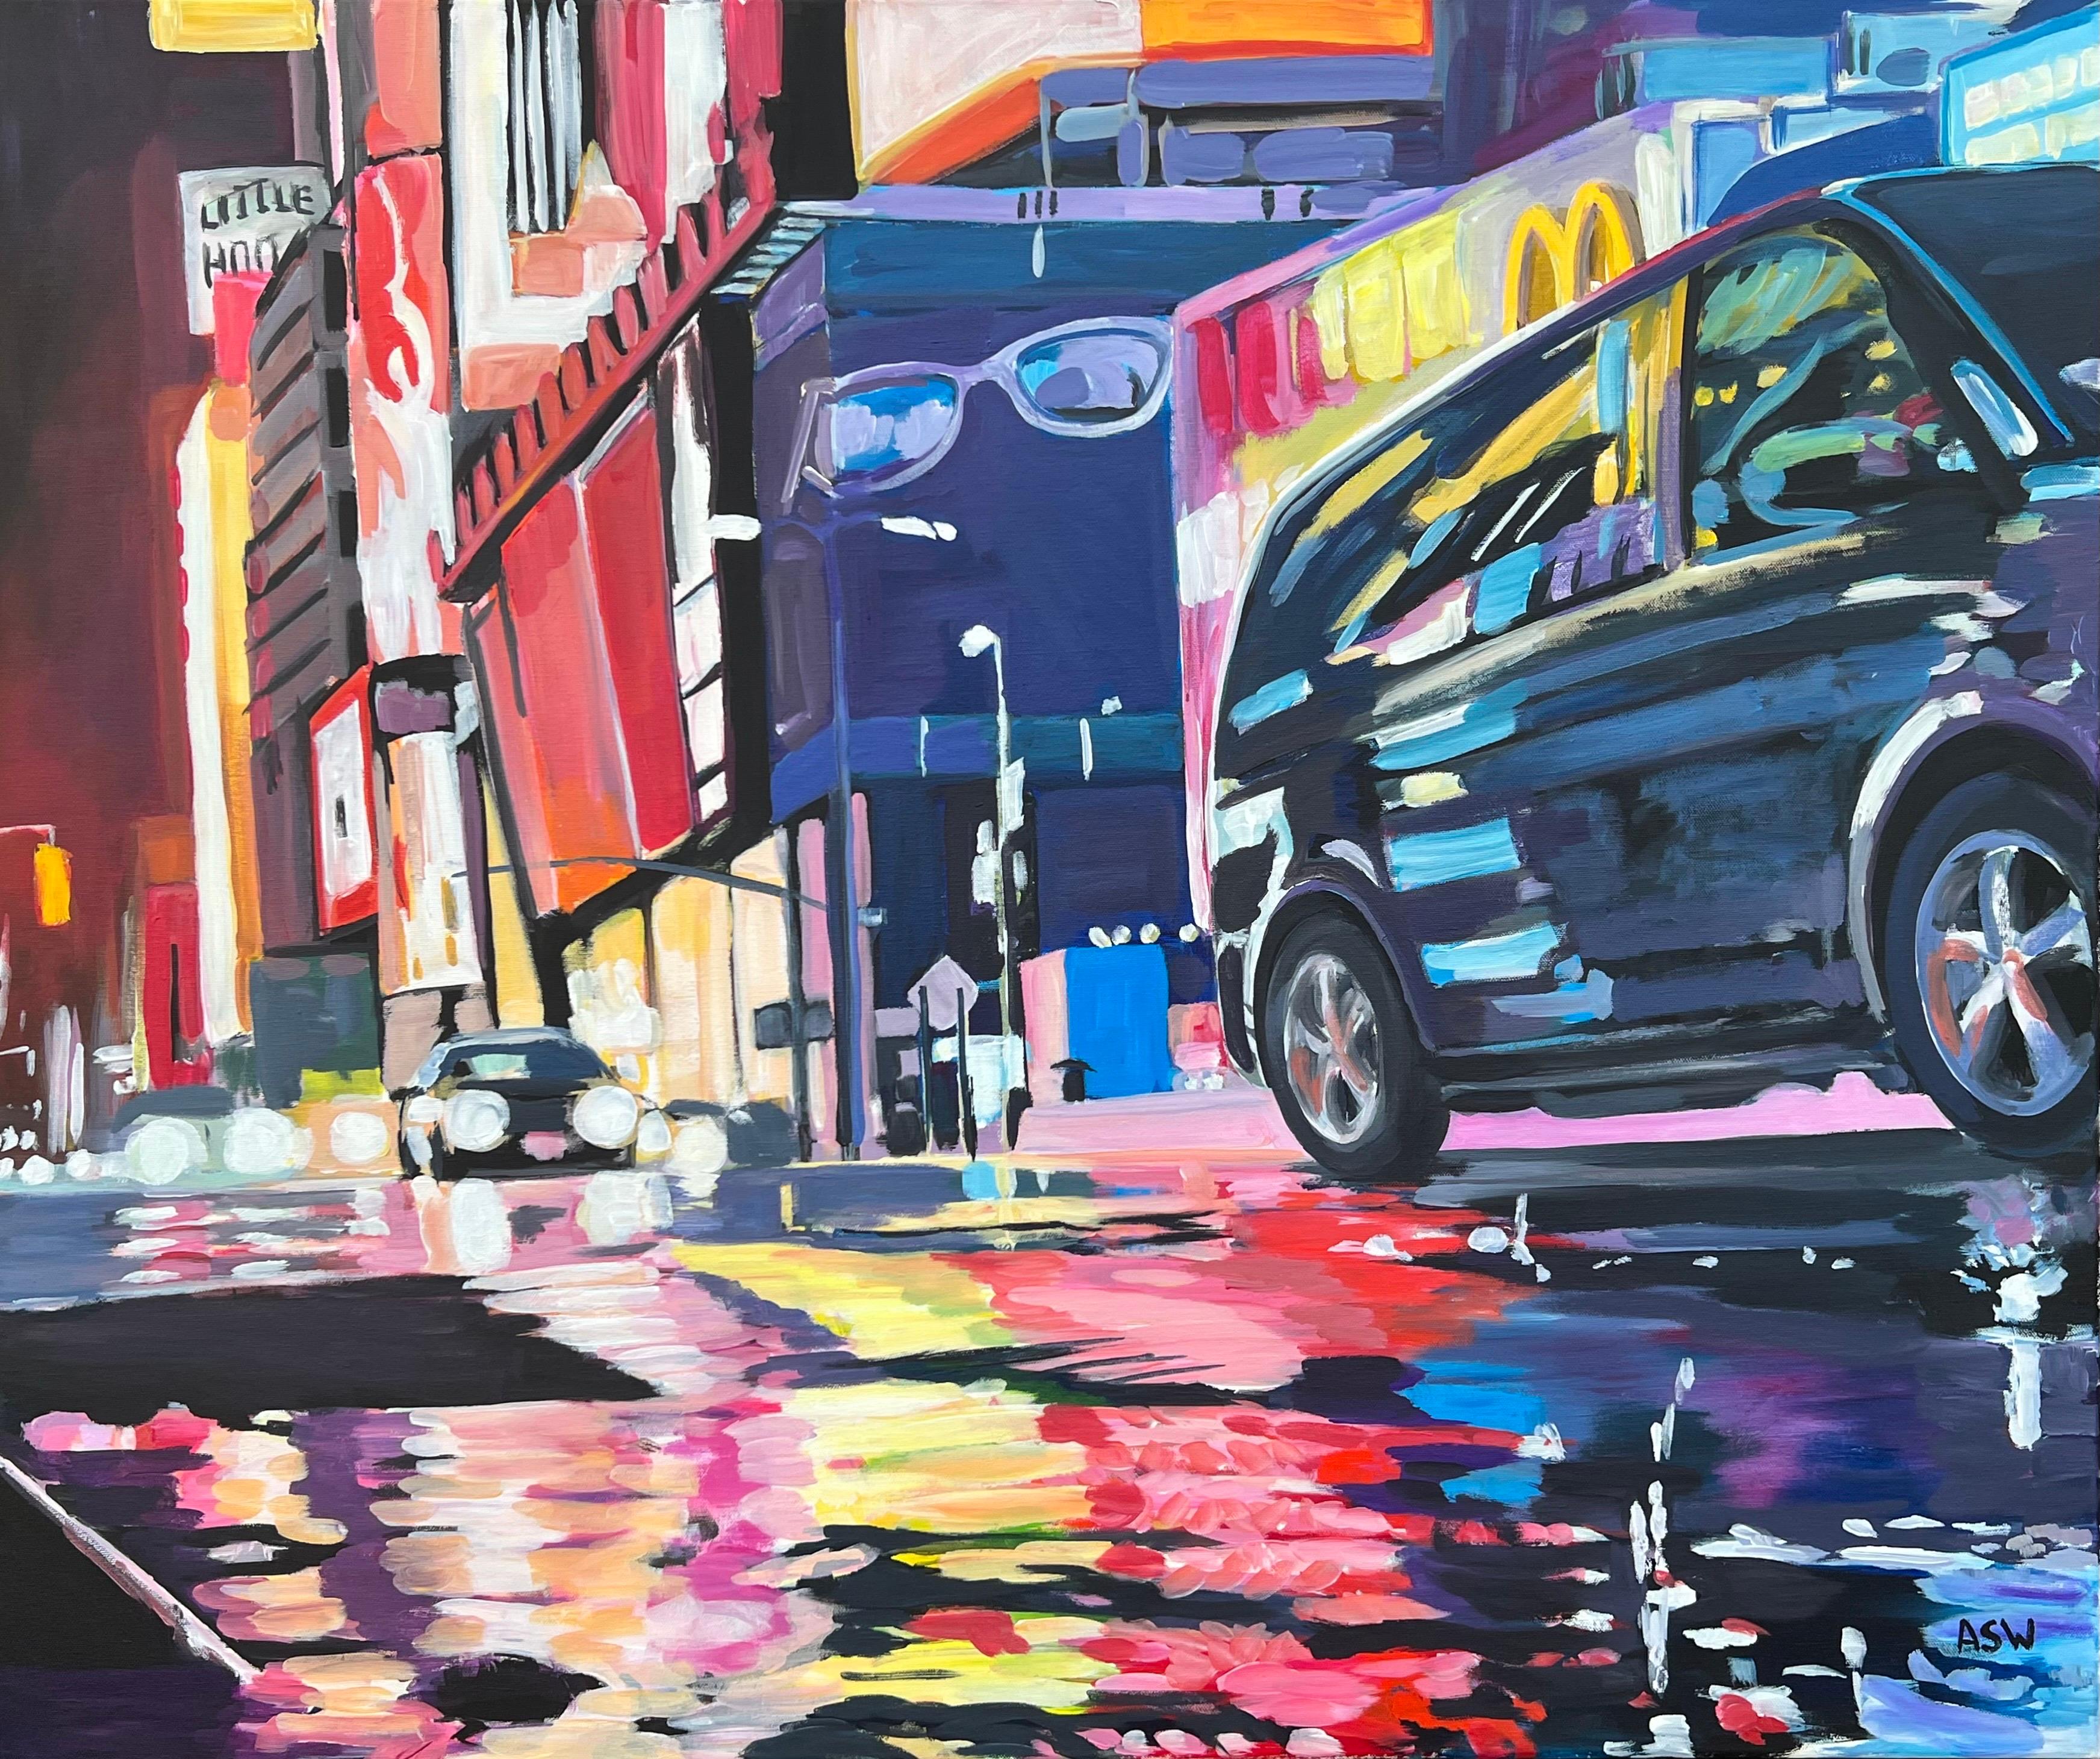 Neon Reflections in the New York City Rain by Contemporary British Urban Artist